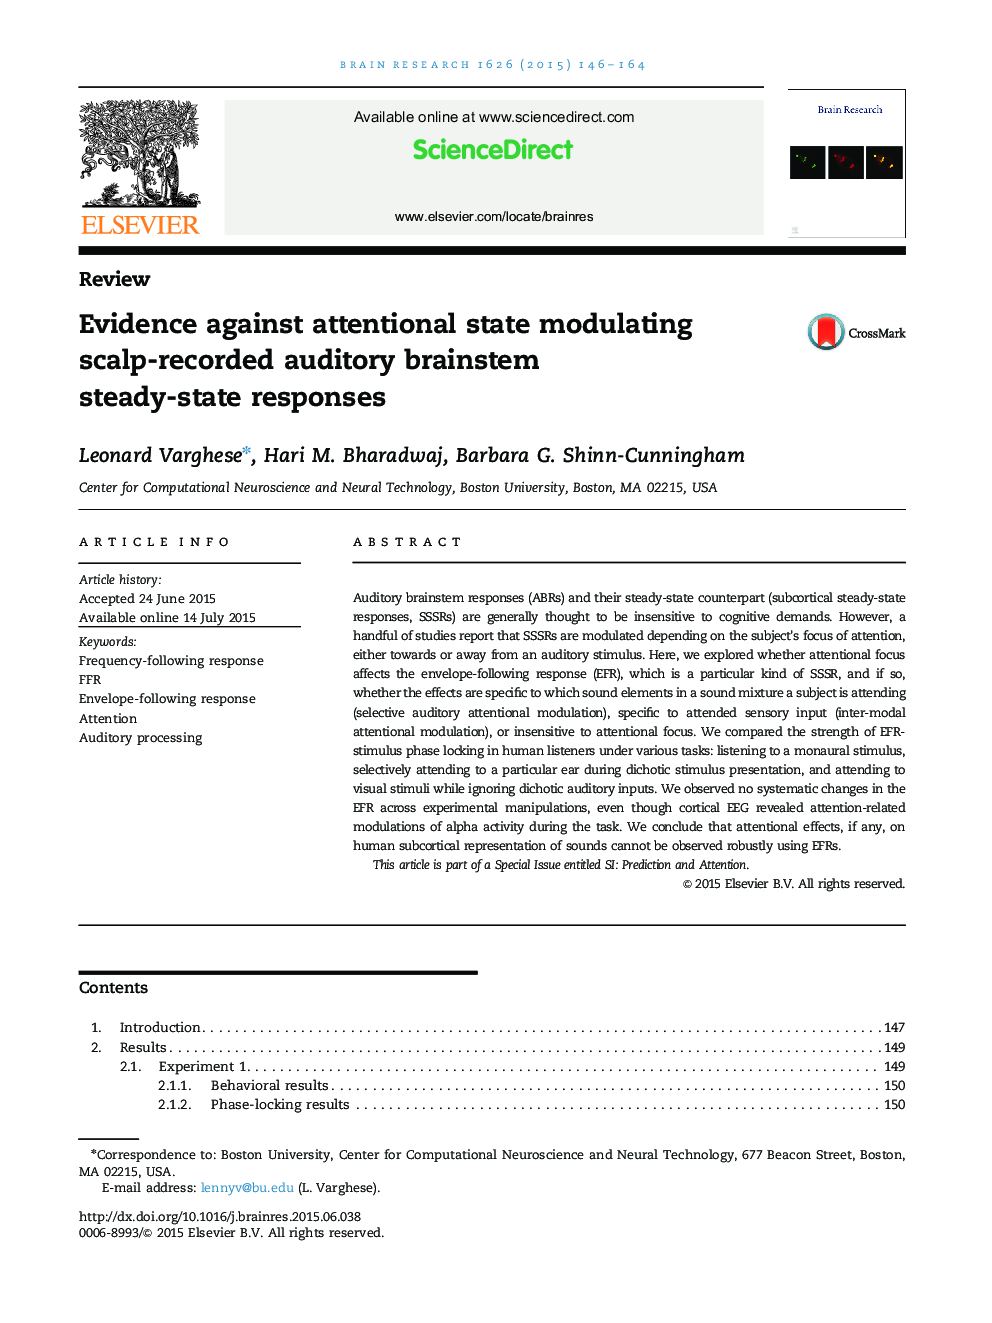 ReviewEvidence against attentional state modulating scalp-recorded auditory brainstem steady-state responses